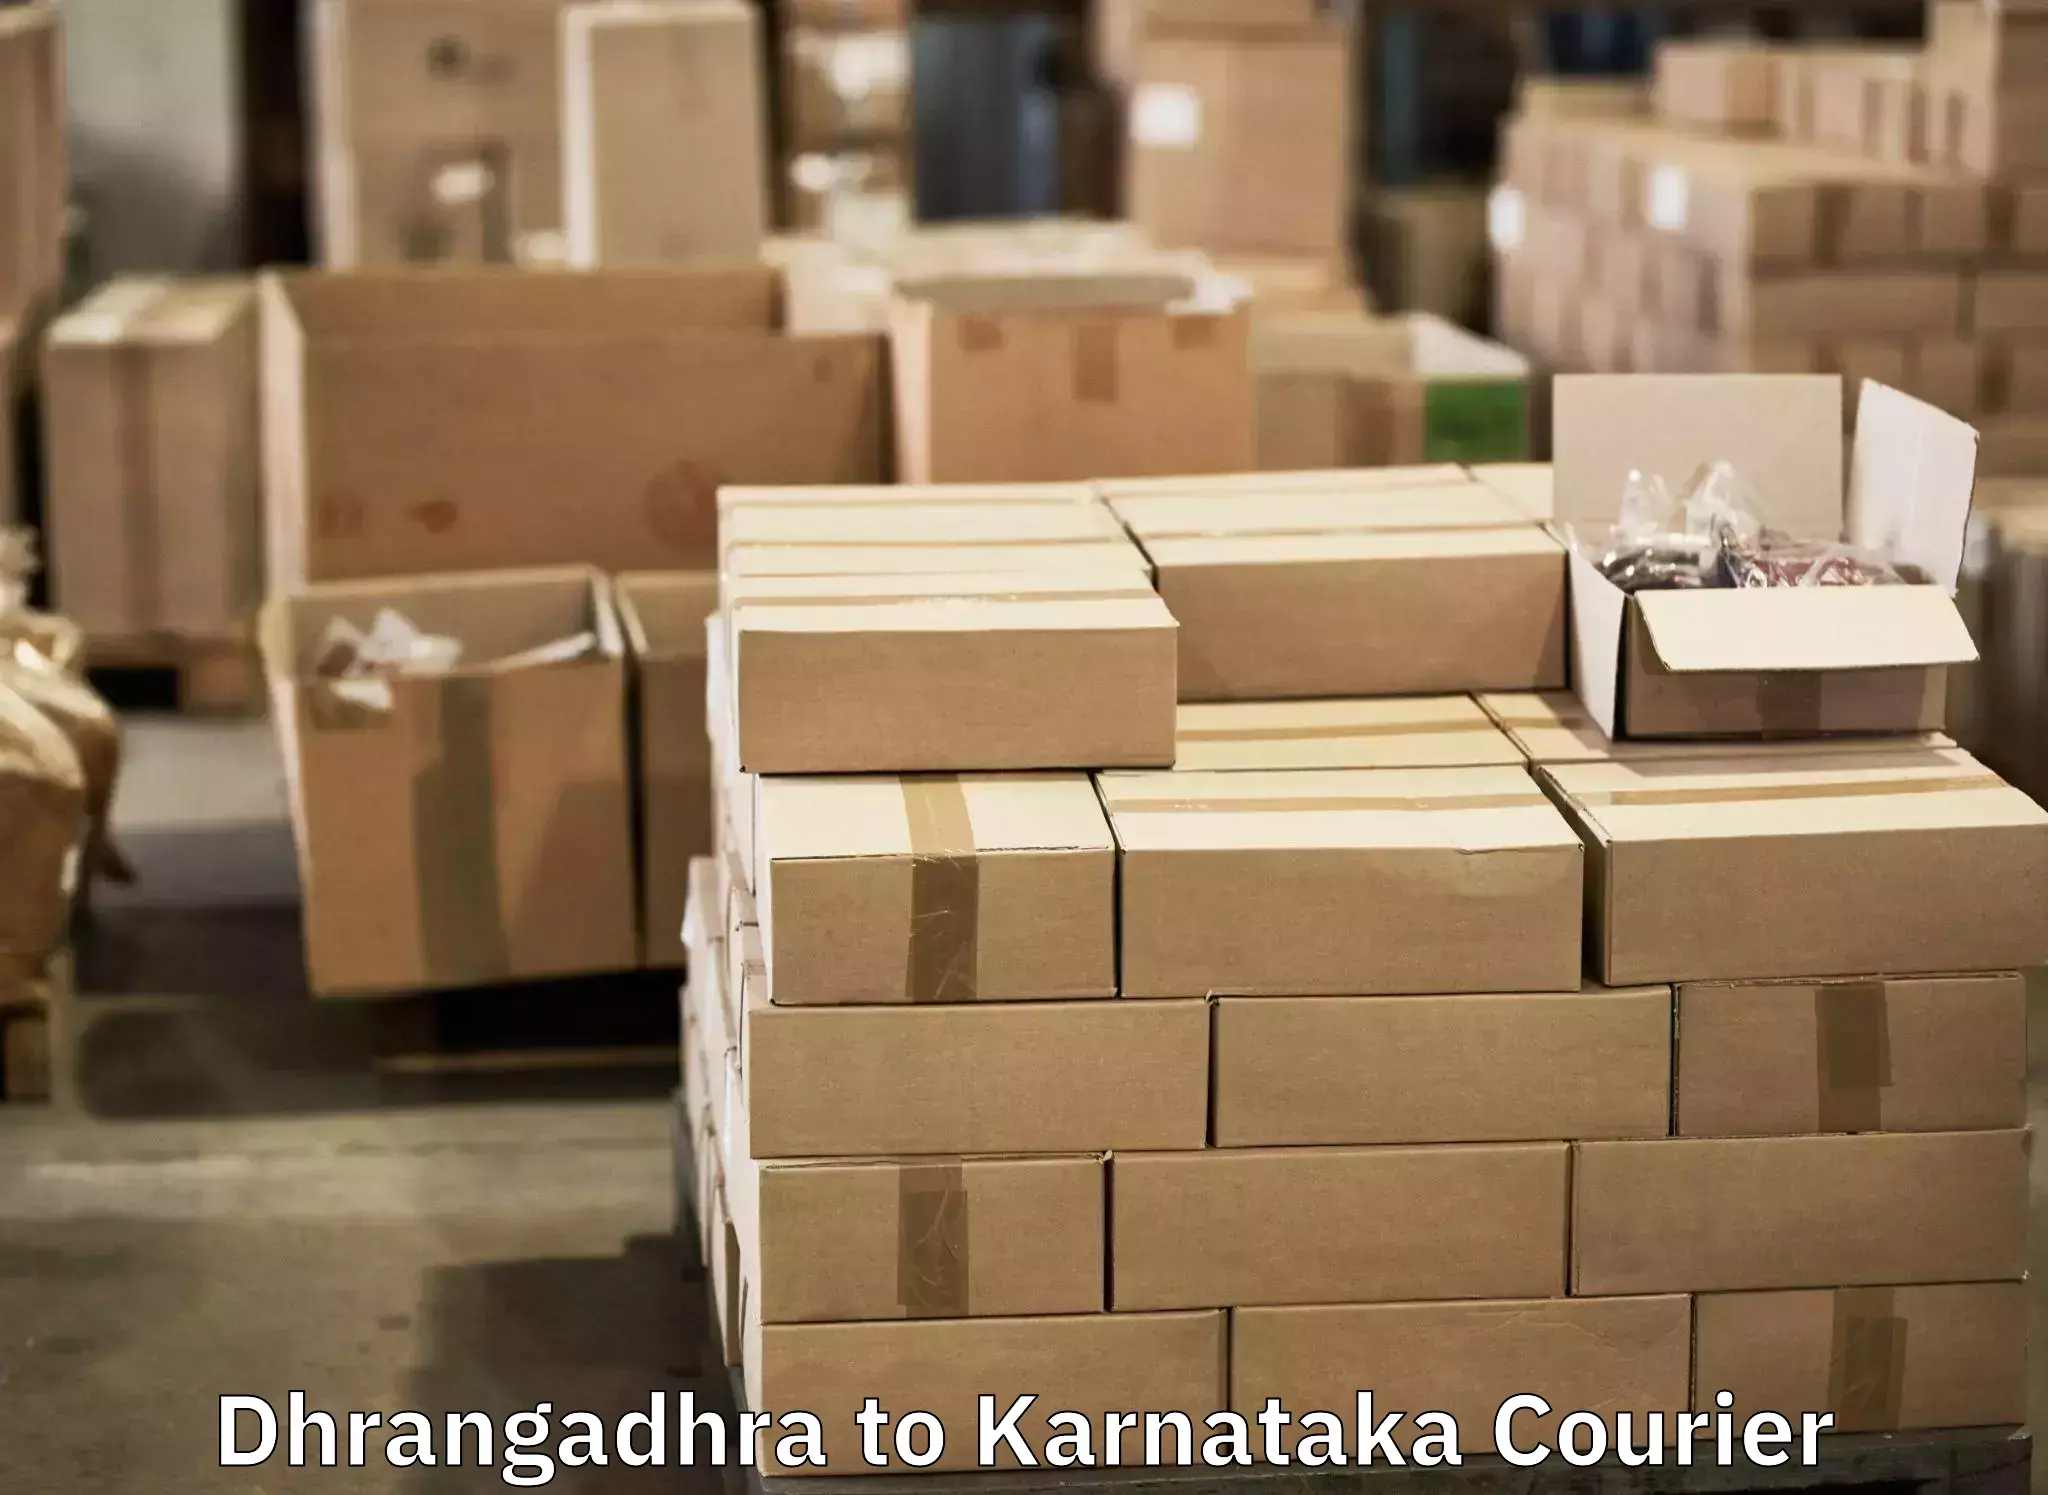 Baggage transport technology Dhrangadhra to Manipal Academy of Higher Education